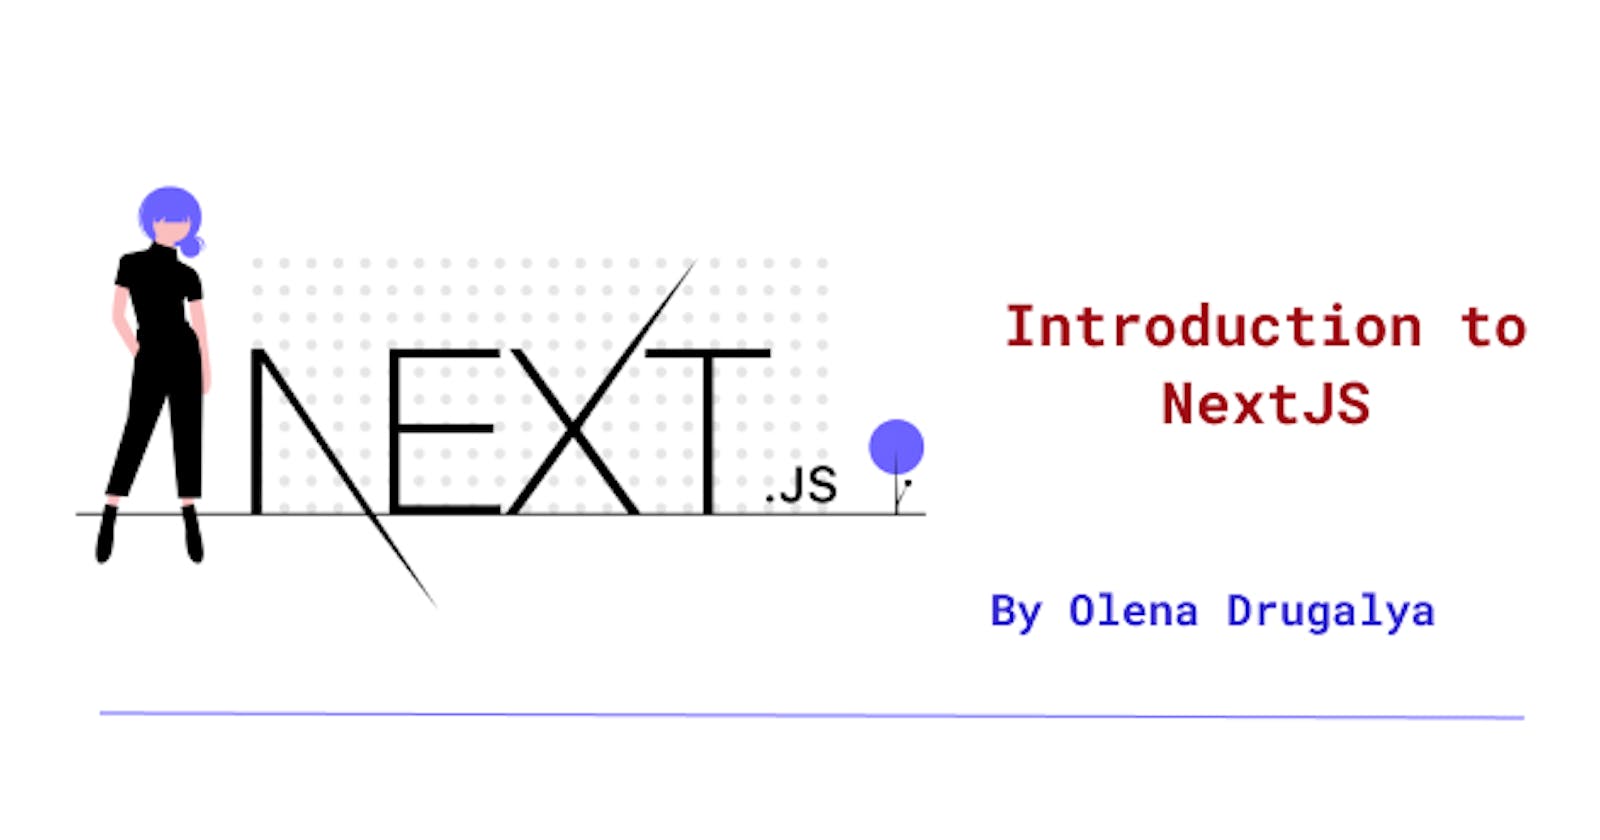 Introduction to NextJS